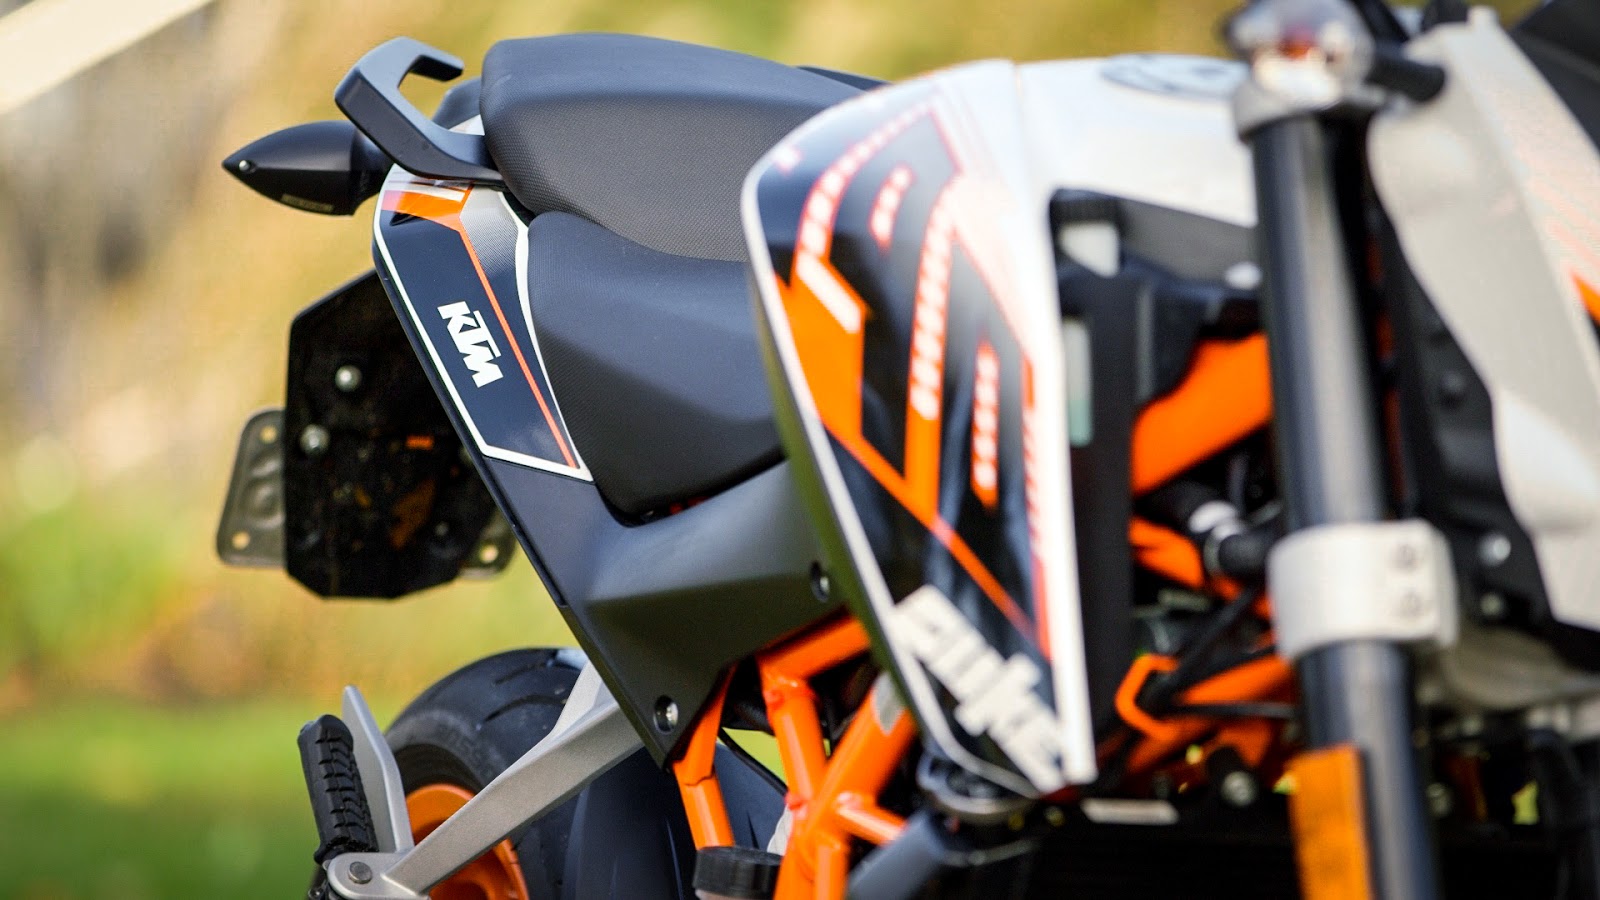 New KTM 690 DUKE 2016 Hd Pictures All Latest New Old Car Hd